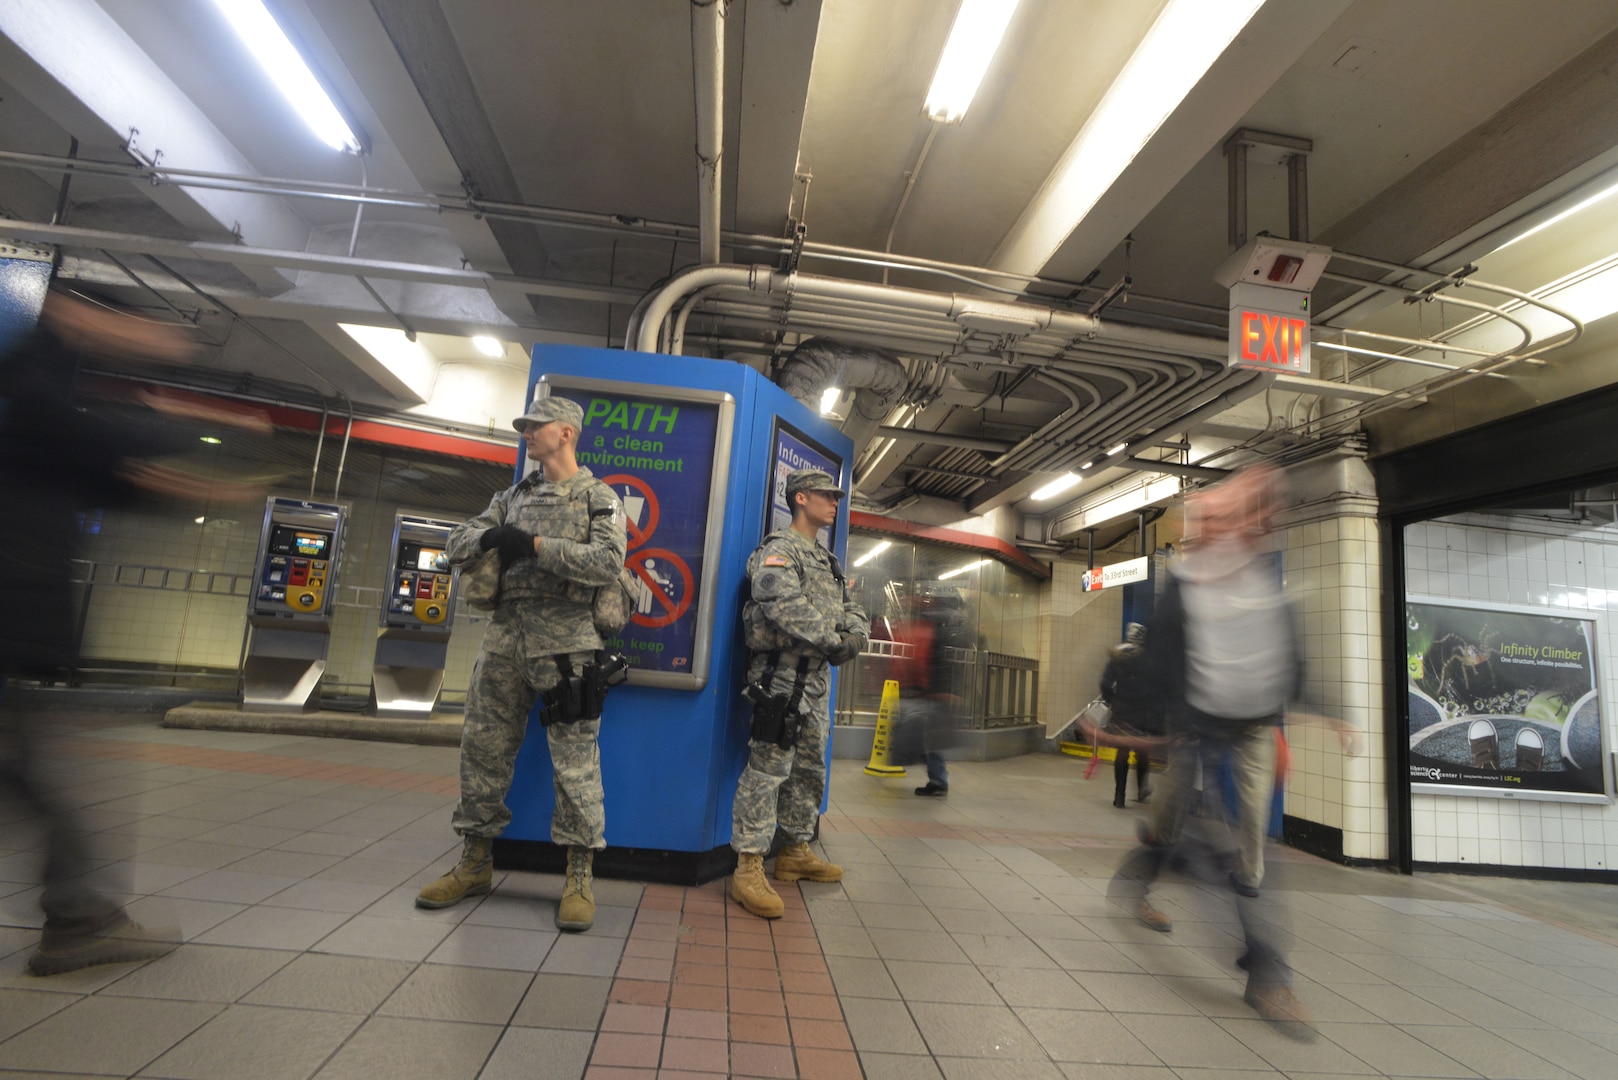 A New York National Guard Soldier and Airman assigned to Joint Task Force Empire Shield keep an eye on the crowd coming and going in New York City's Pennsylvania Station Amtrak terminal on  Tuesday, Dec. 23, 2014. The two are part of the New York National Guard's  500-member State Active Duty force that assists  the Metropolitan Transit Authority Police Department, the Bridge and Port Authority Police Department and the Amtrak Police at New York City's airports and key transit terminals. The uniformed National Guard members do not have arrest authority but provide additional eyes and assist police when requested.